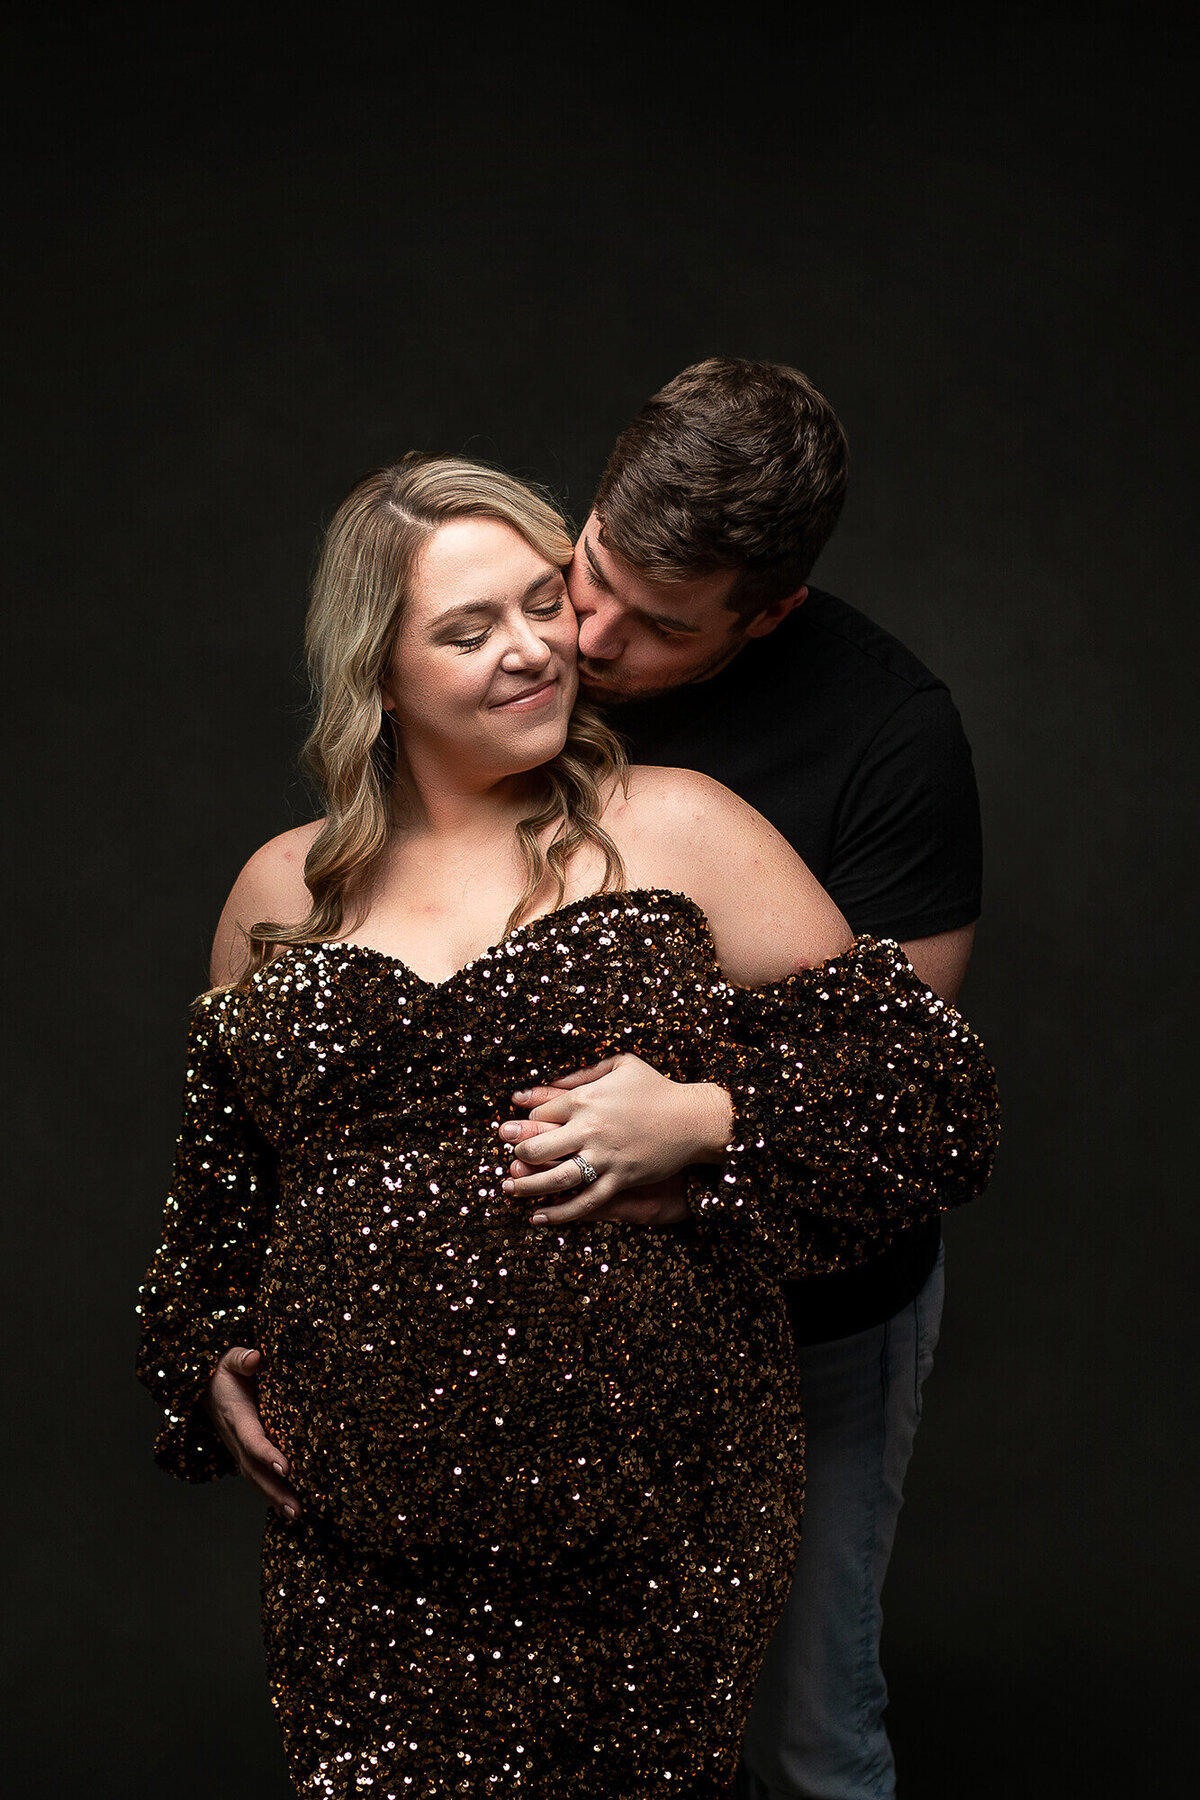 Maternity session in Southern Minnesota.